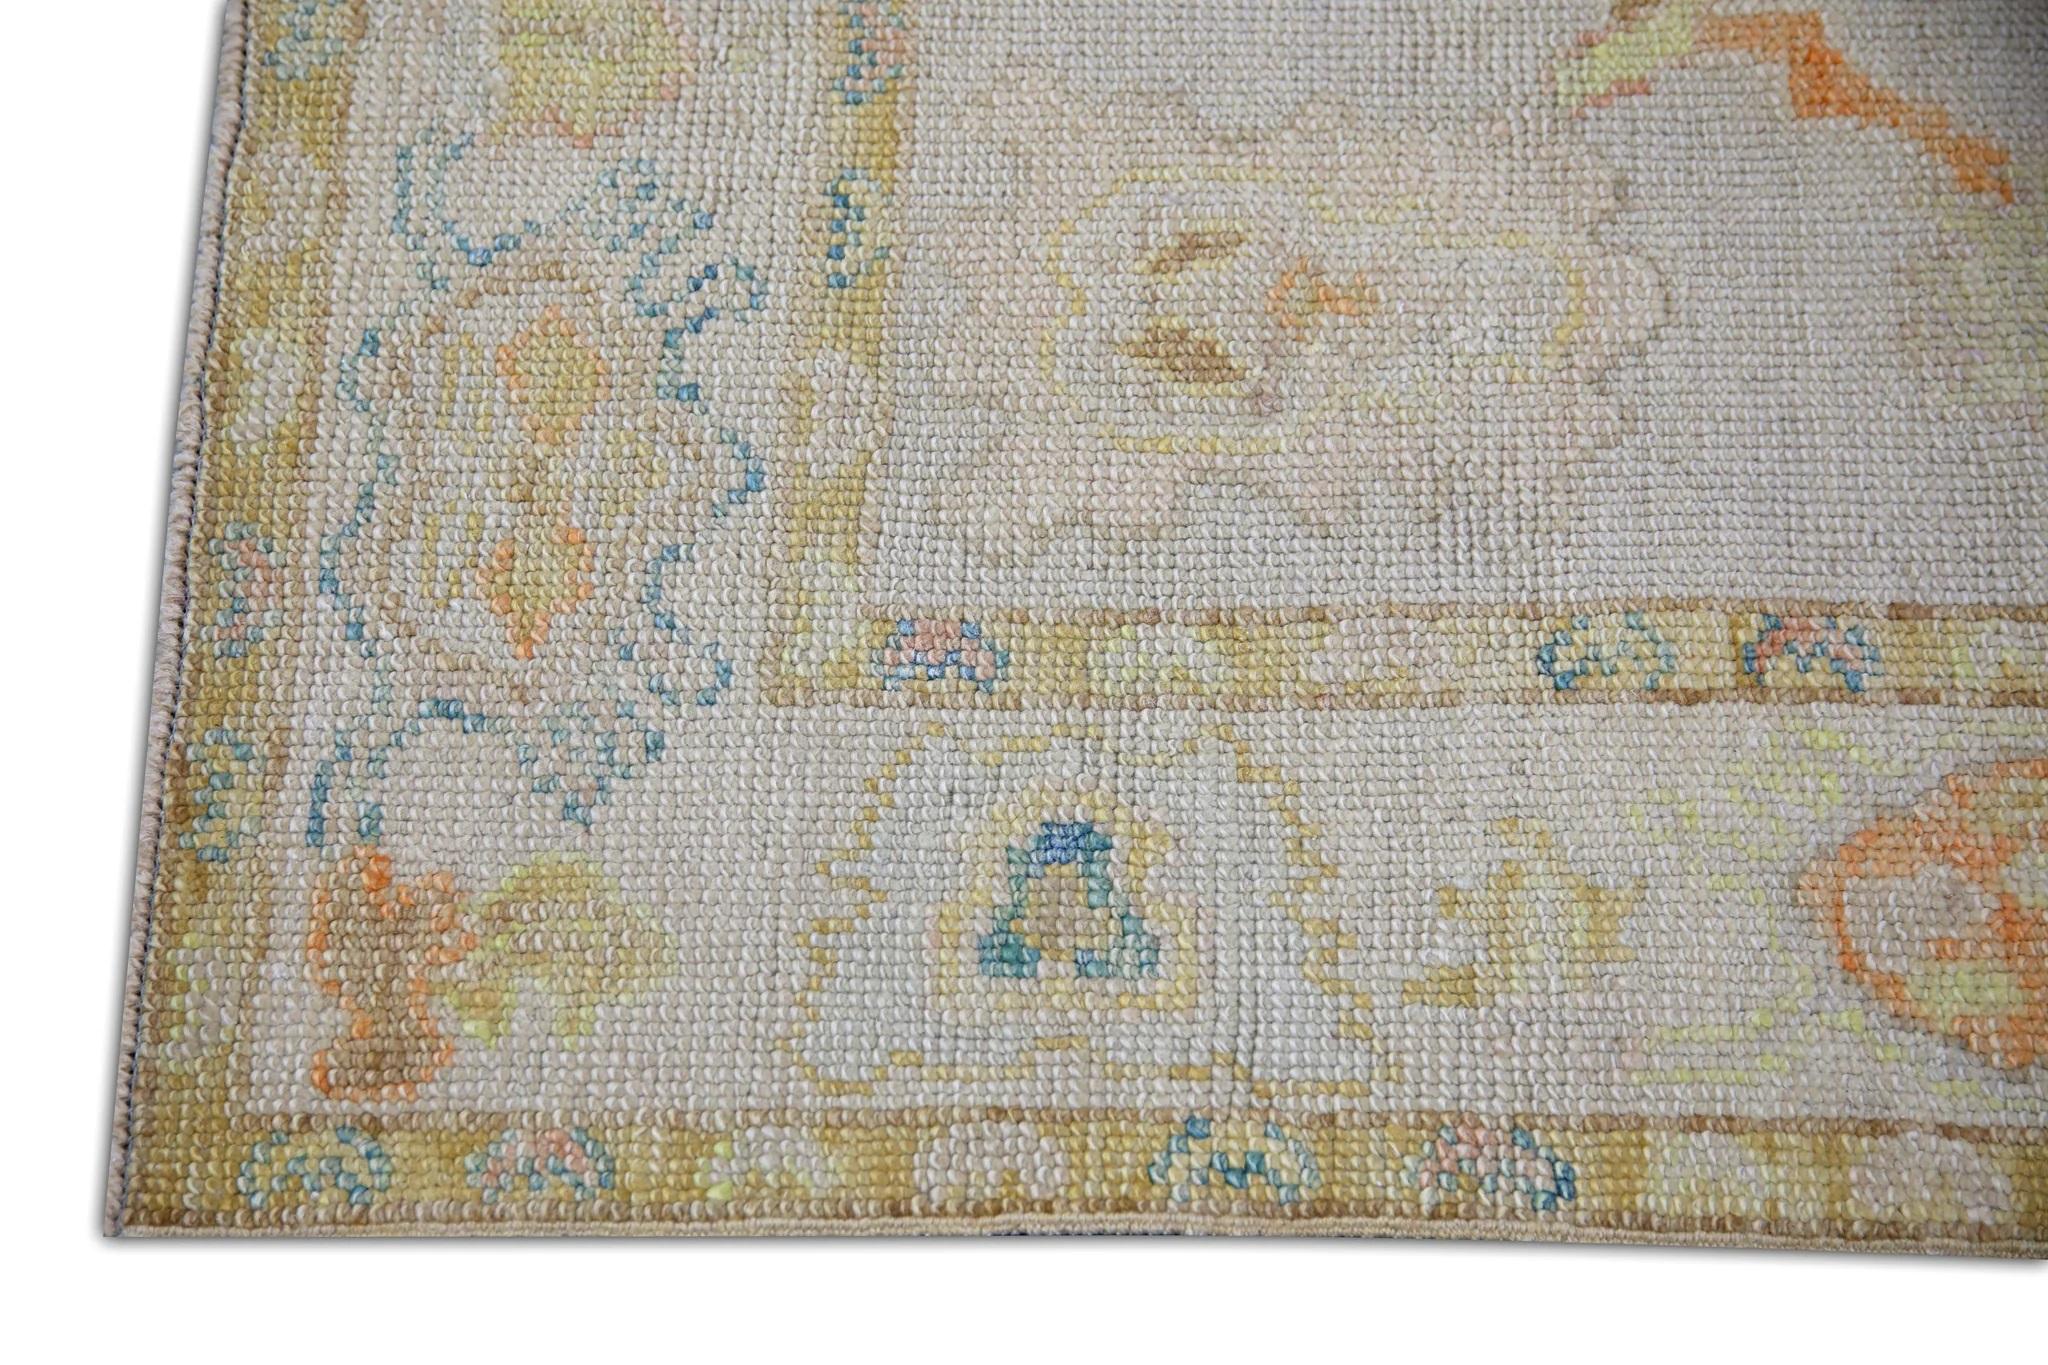 Vegetable Dyed Handwoven Wool Turkish Oushak Rug w/ Colorful Pastel Floral Design 3'11